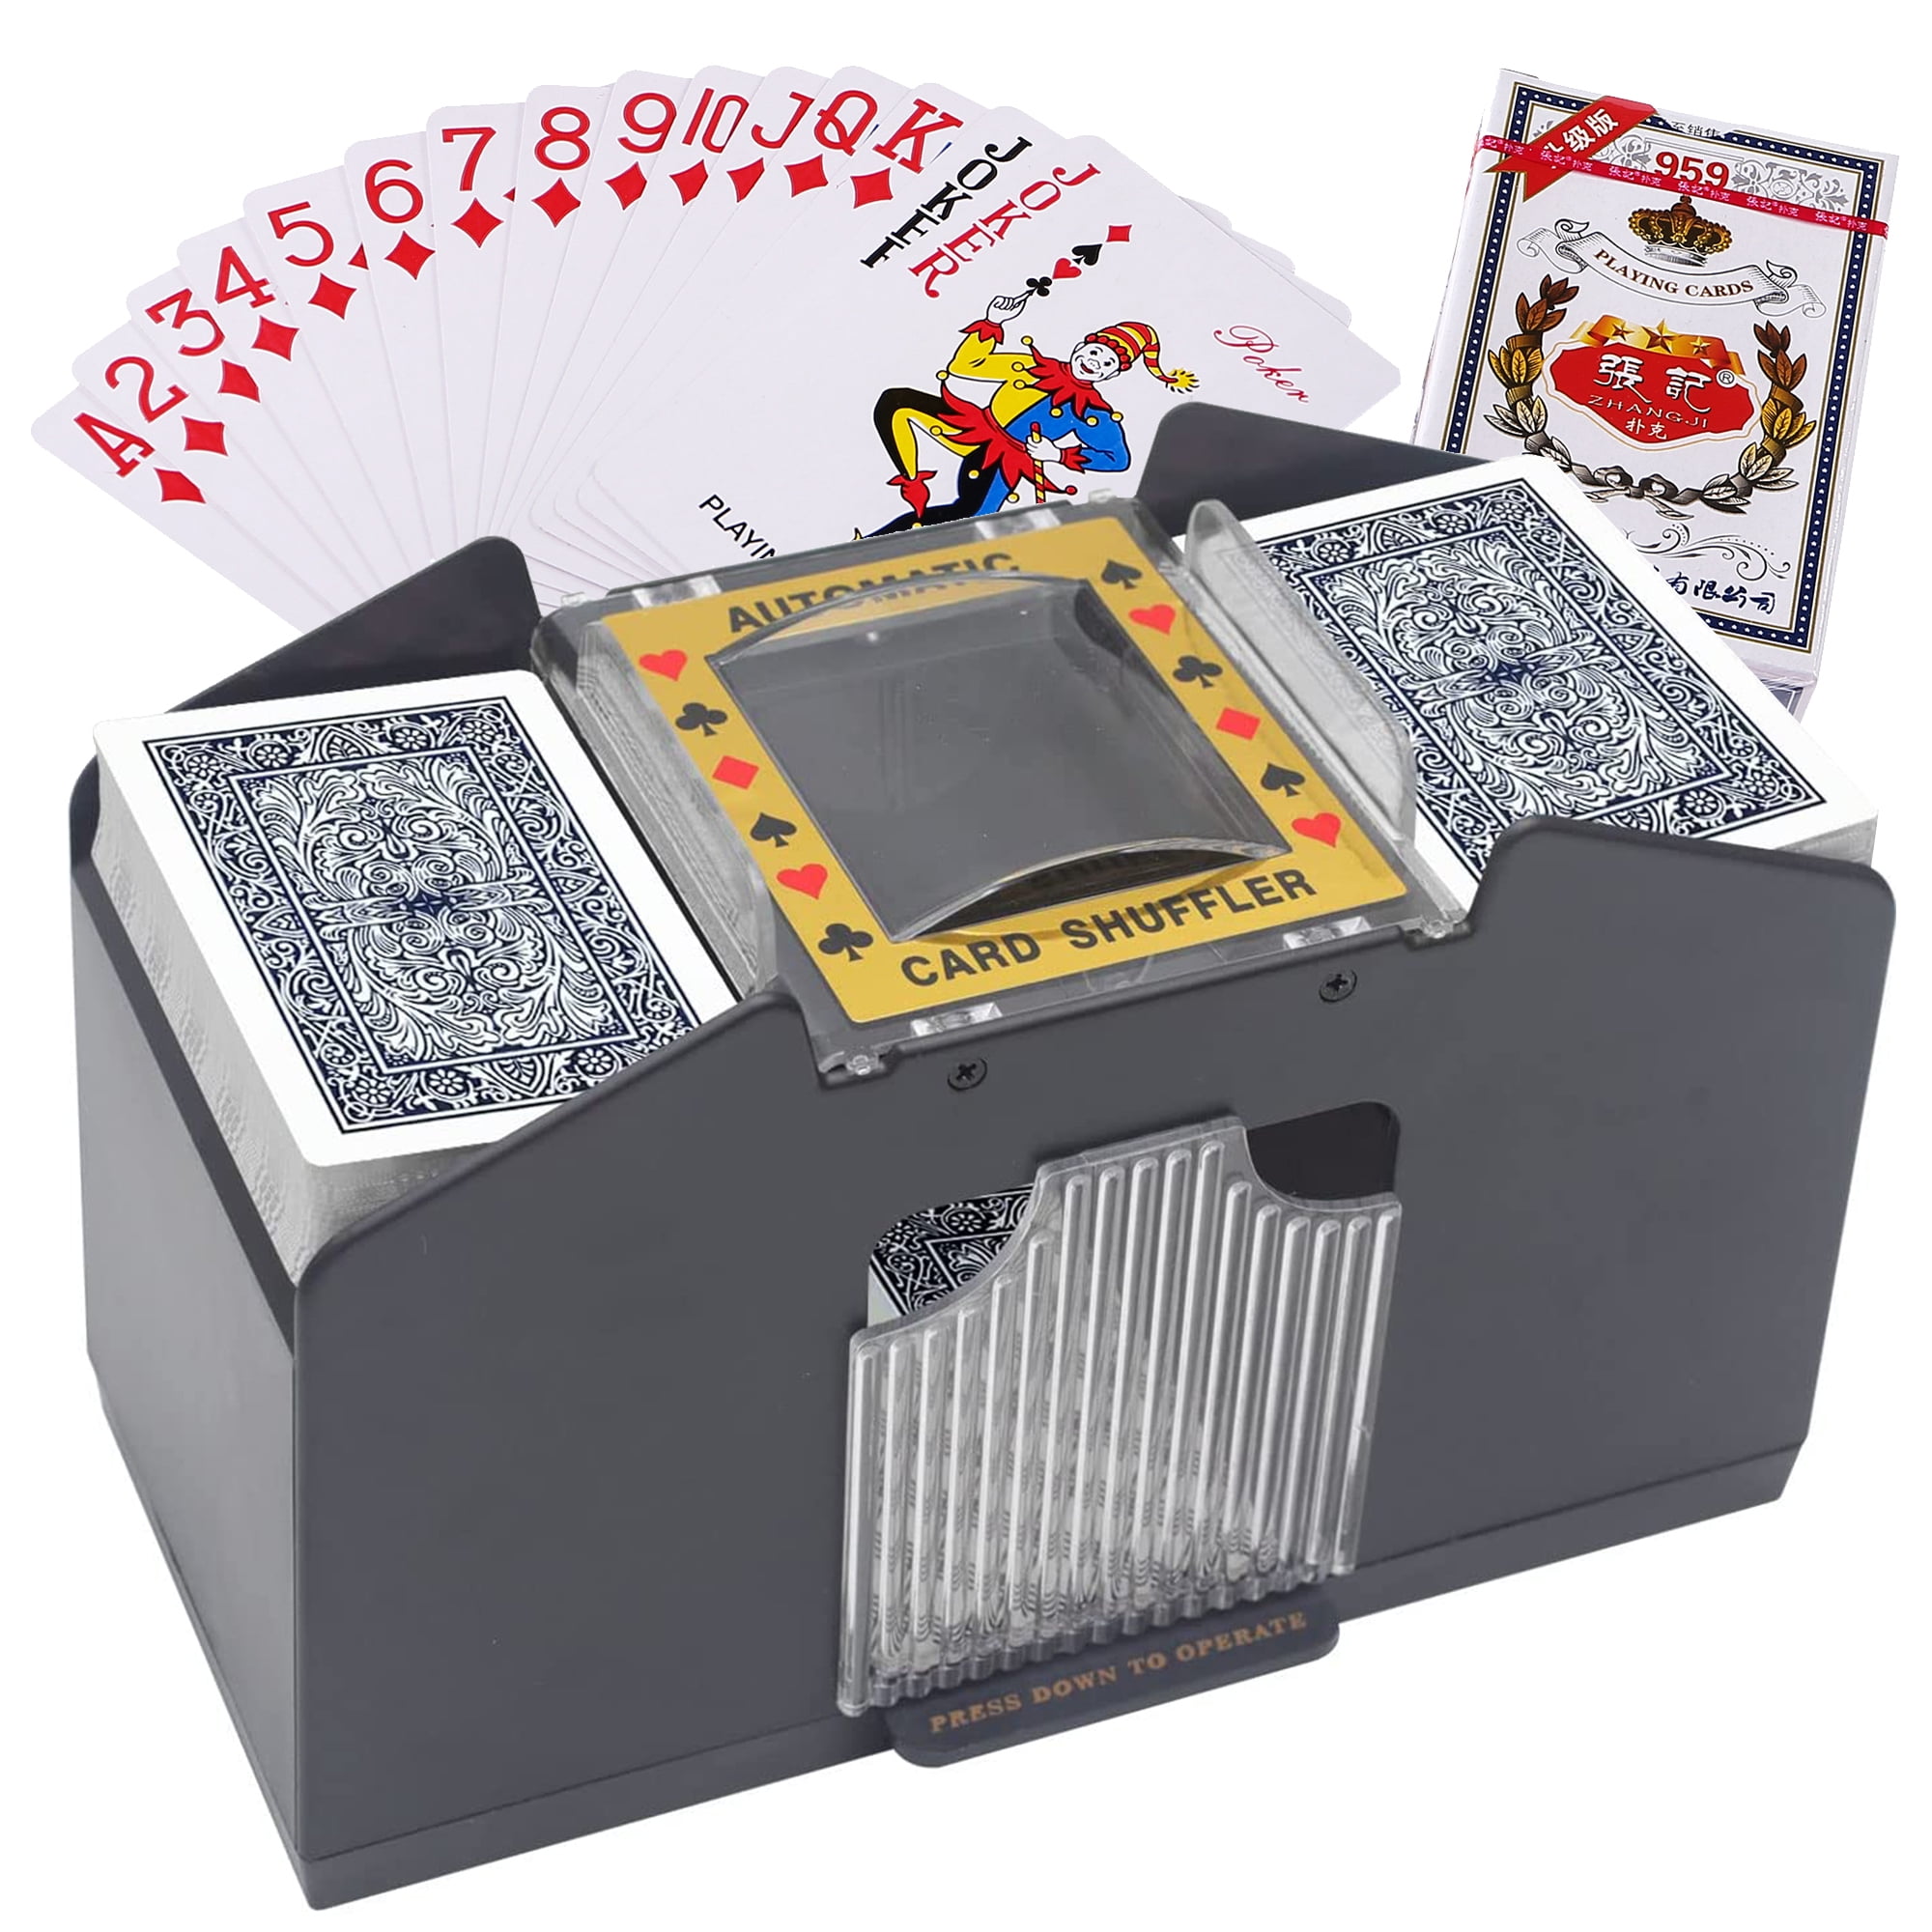 Electric Casino Poker Blackjack Automatic Shufflers 1-4 Decks Playing Card Shuffling Machine Battery Operated Tool for UNO Texas Hold'em Home Card Games 